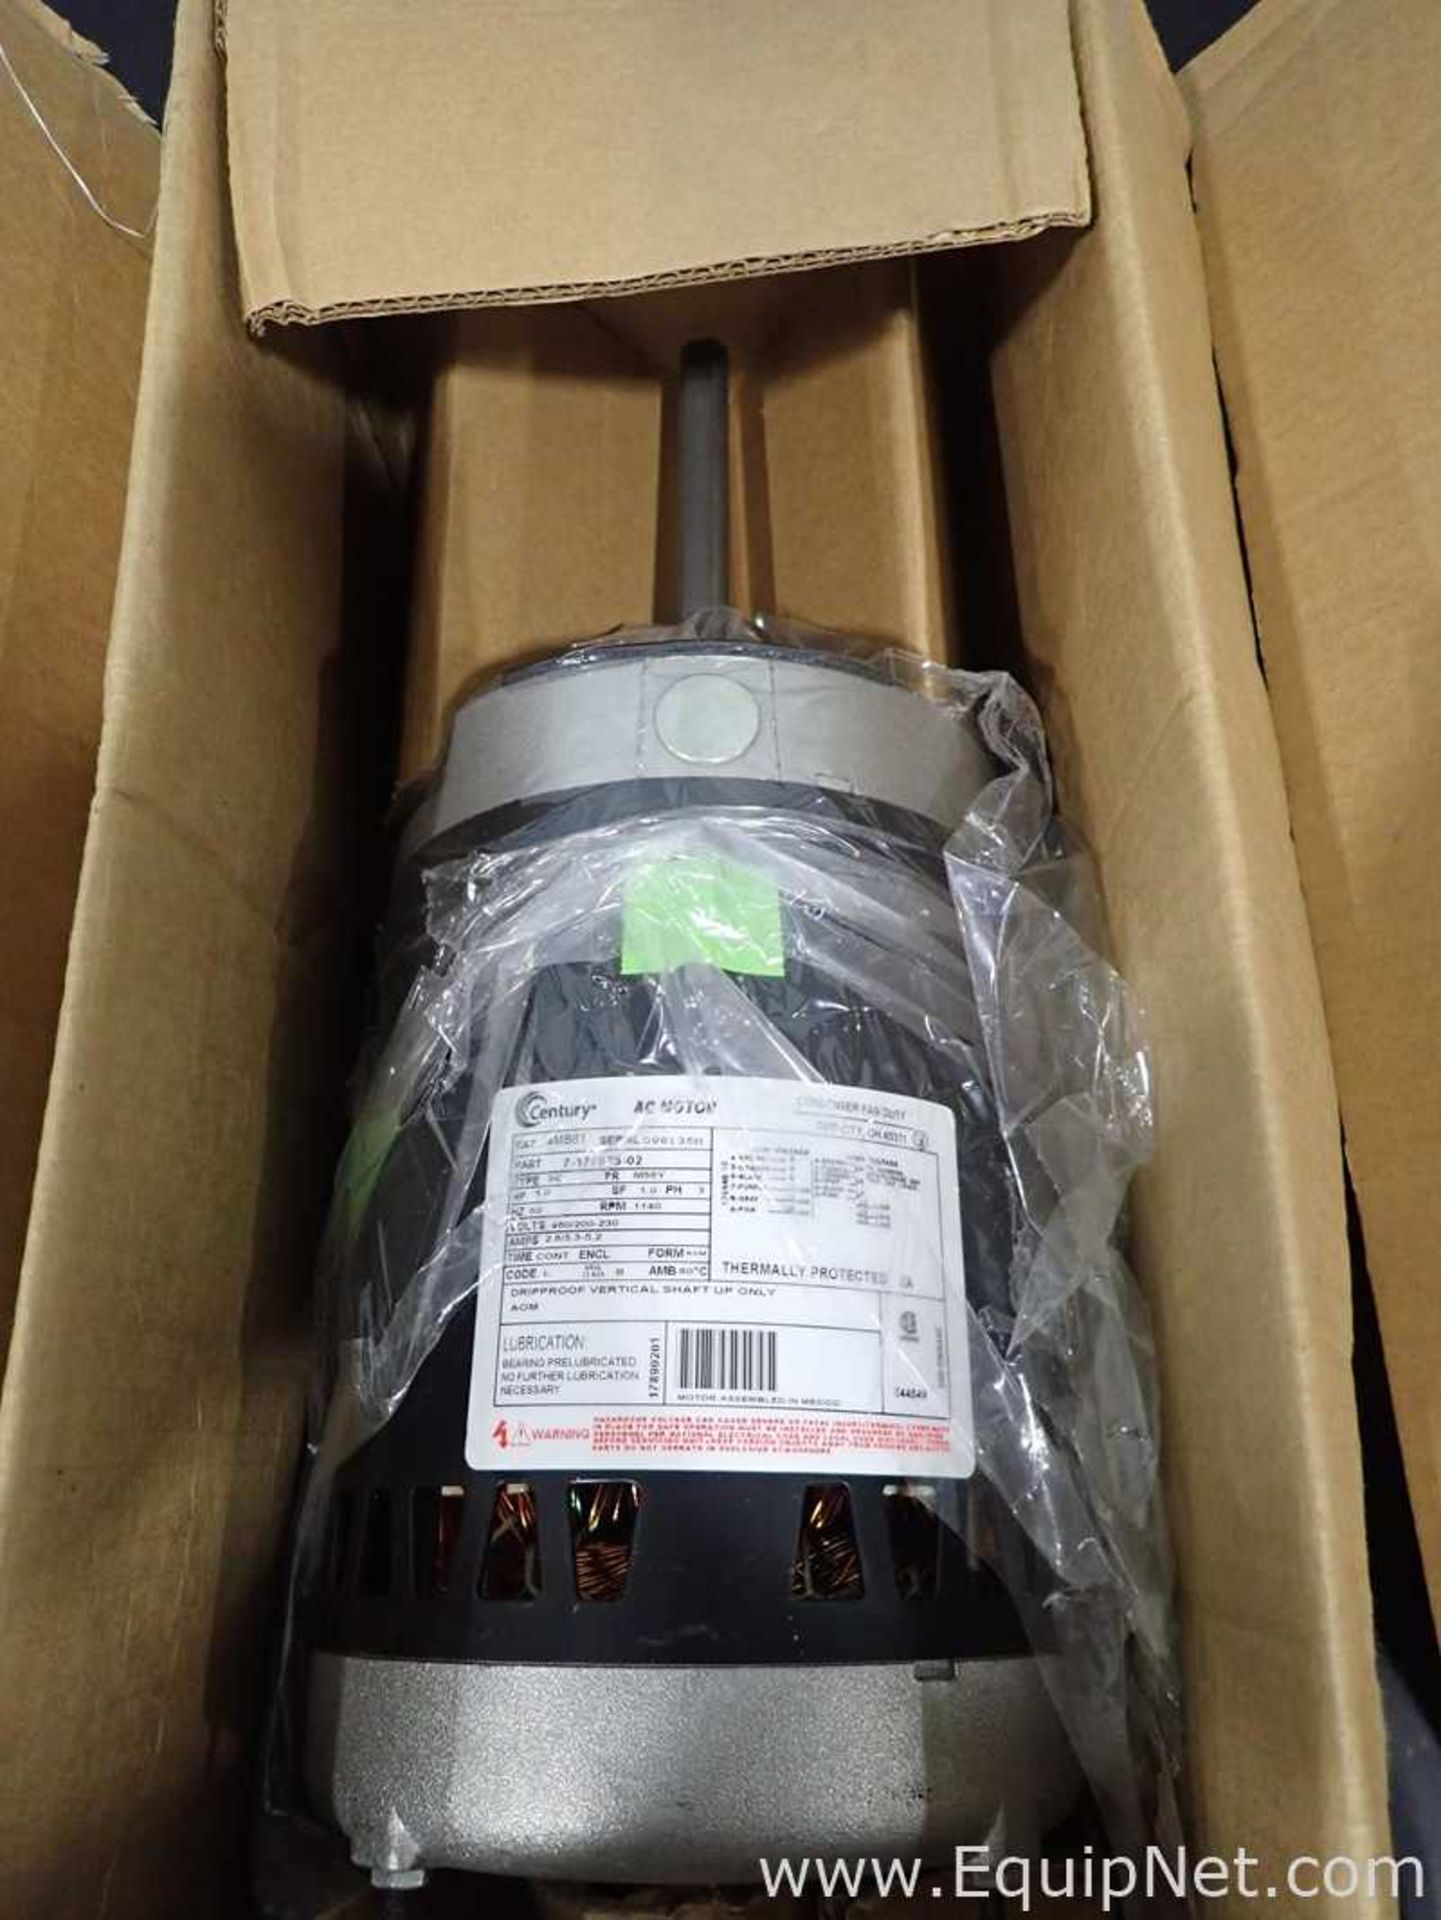 EQUIPNET LISTING #793359; REMOVAL COST: $25; DESCRIPTION: Unused Lot of 3 Century Electric Motor - Image 2 of 10